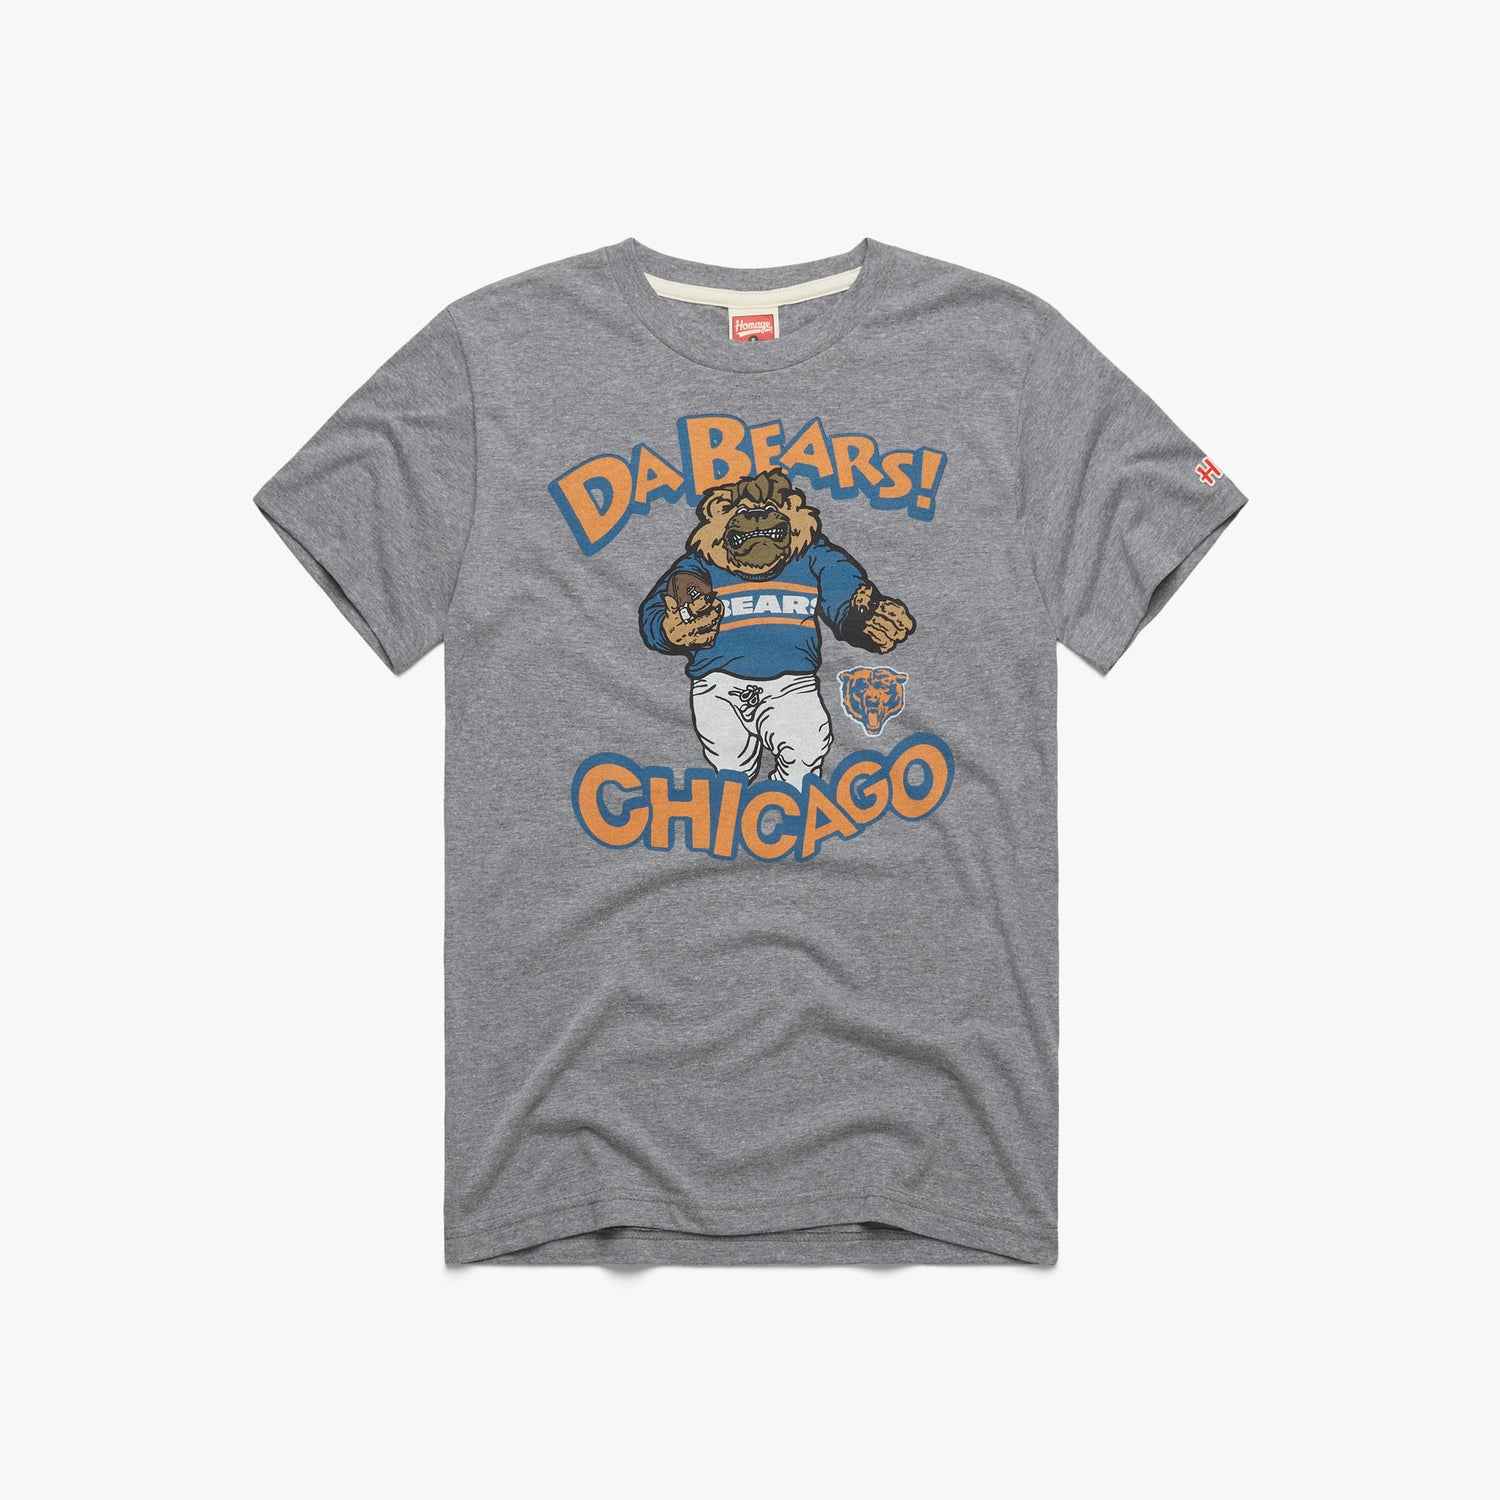 Chicago Bears Da Bears T-Shirt from Homage. | Officially Licensed Vintage NFL Apparel from Homage Pro Shop.